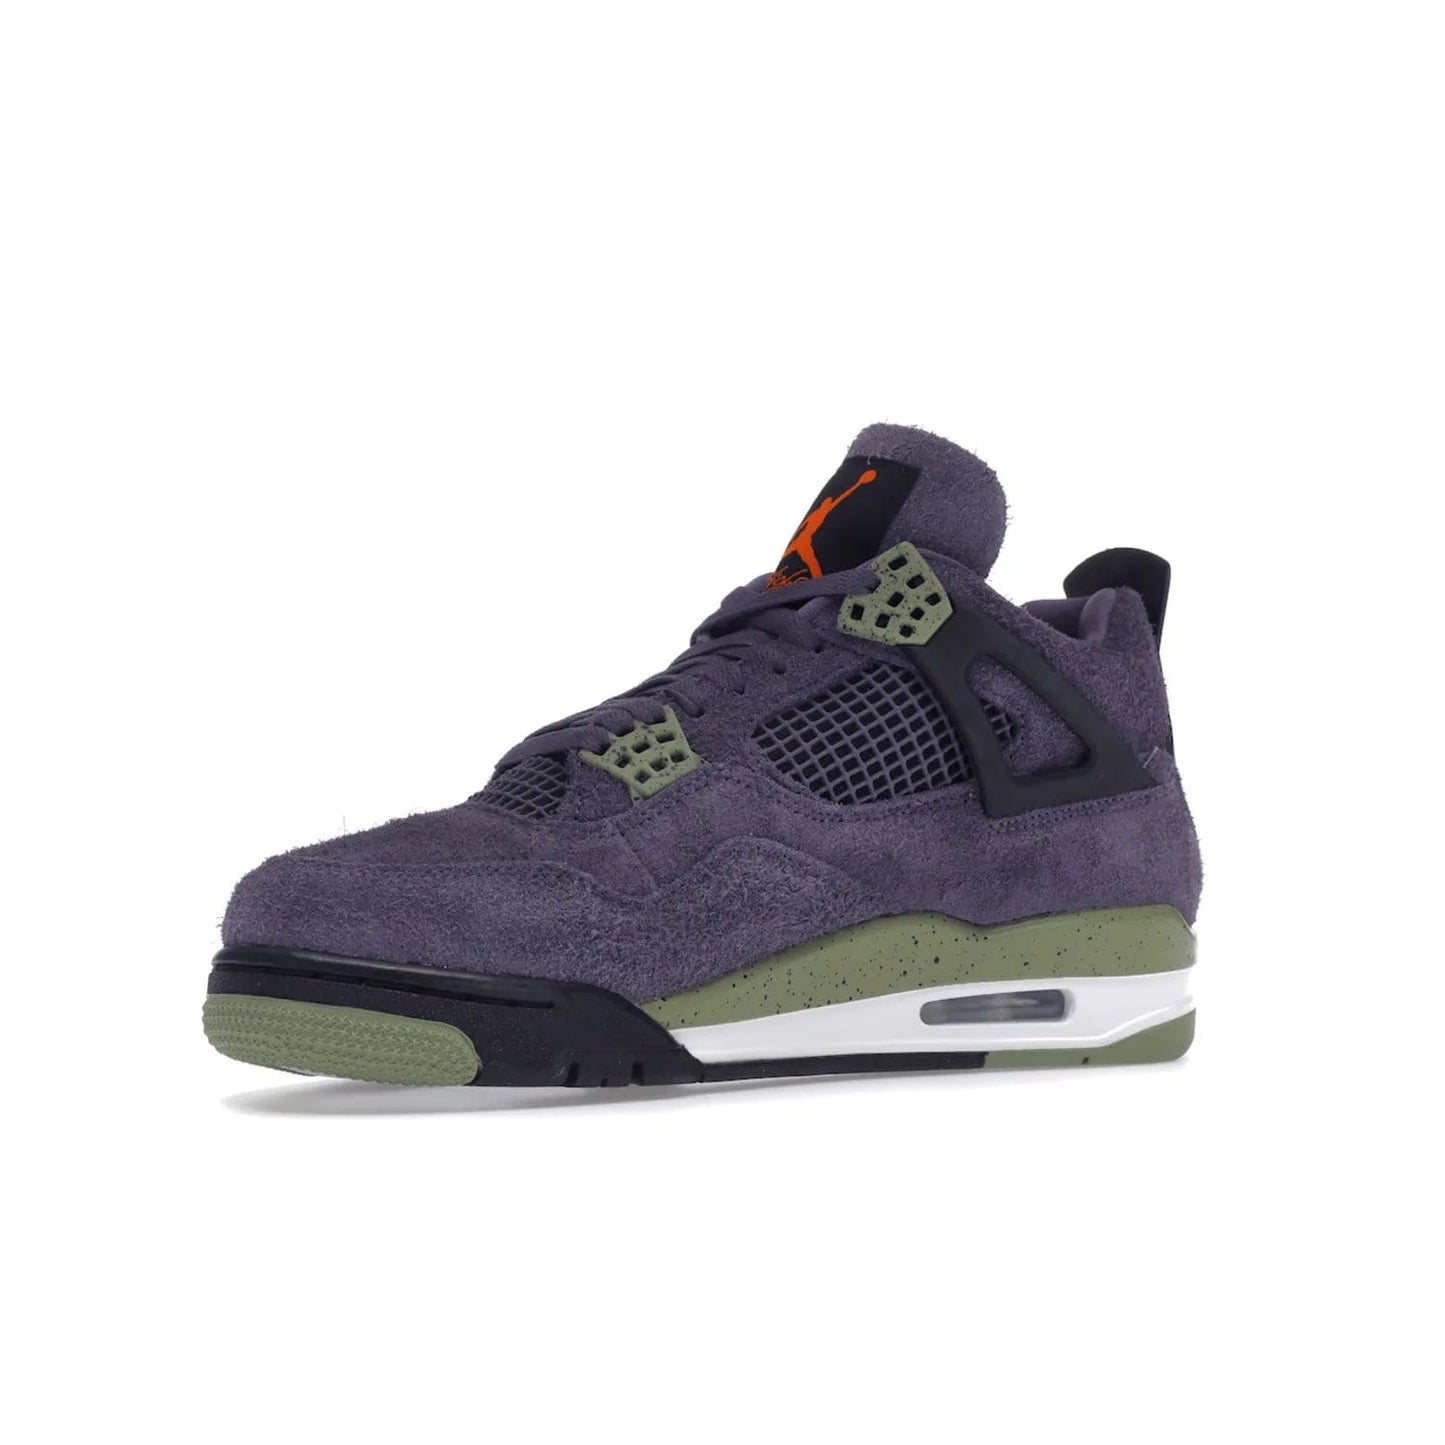 Jordan 4 Retro Canyon Purple (Women's) - Image 16 - Only at www.BallersClubKickz.com - New Air Jordan 4 Retro Canyon Purple W sneaker features shaggy purple suede, lime highlights & safety orange Jumpman branding. Classic ankle-hugging silhouette with modern colors released 15/10/2022.